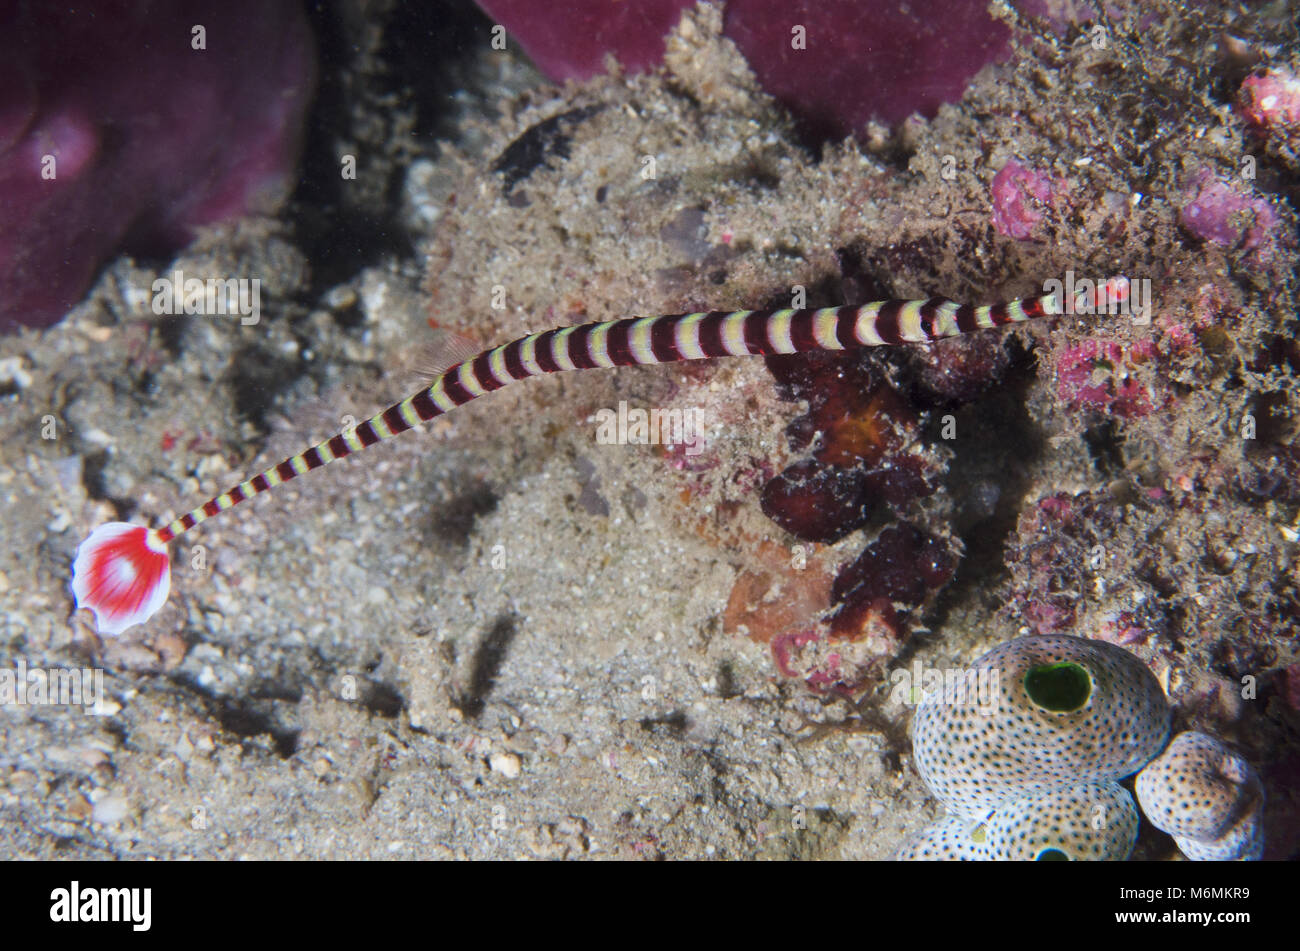 Ringed Pipefish High Resolution Stock Photography and Images - Alamy